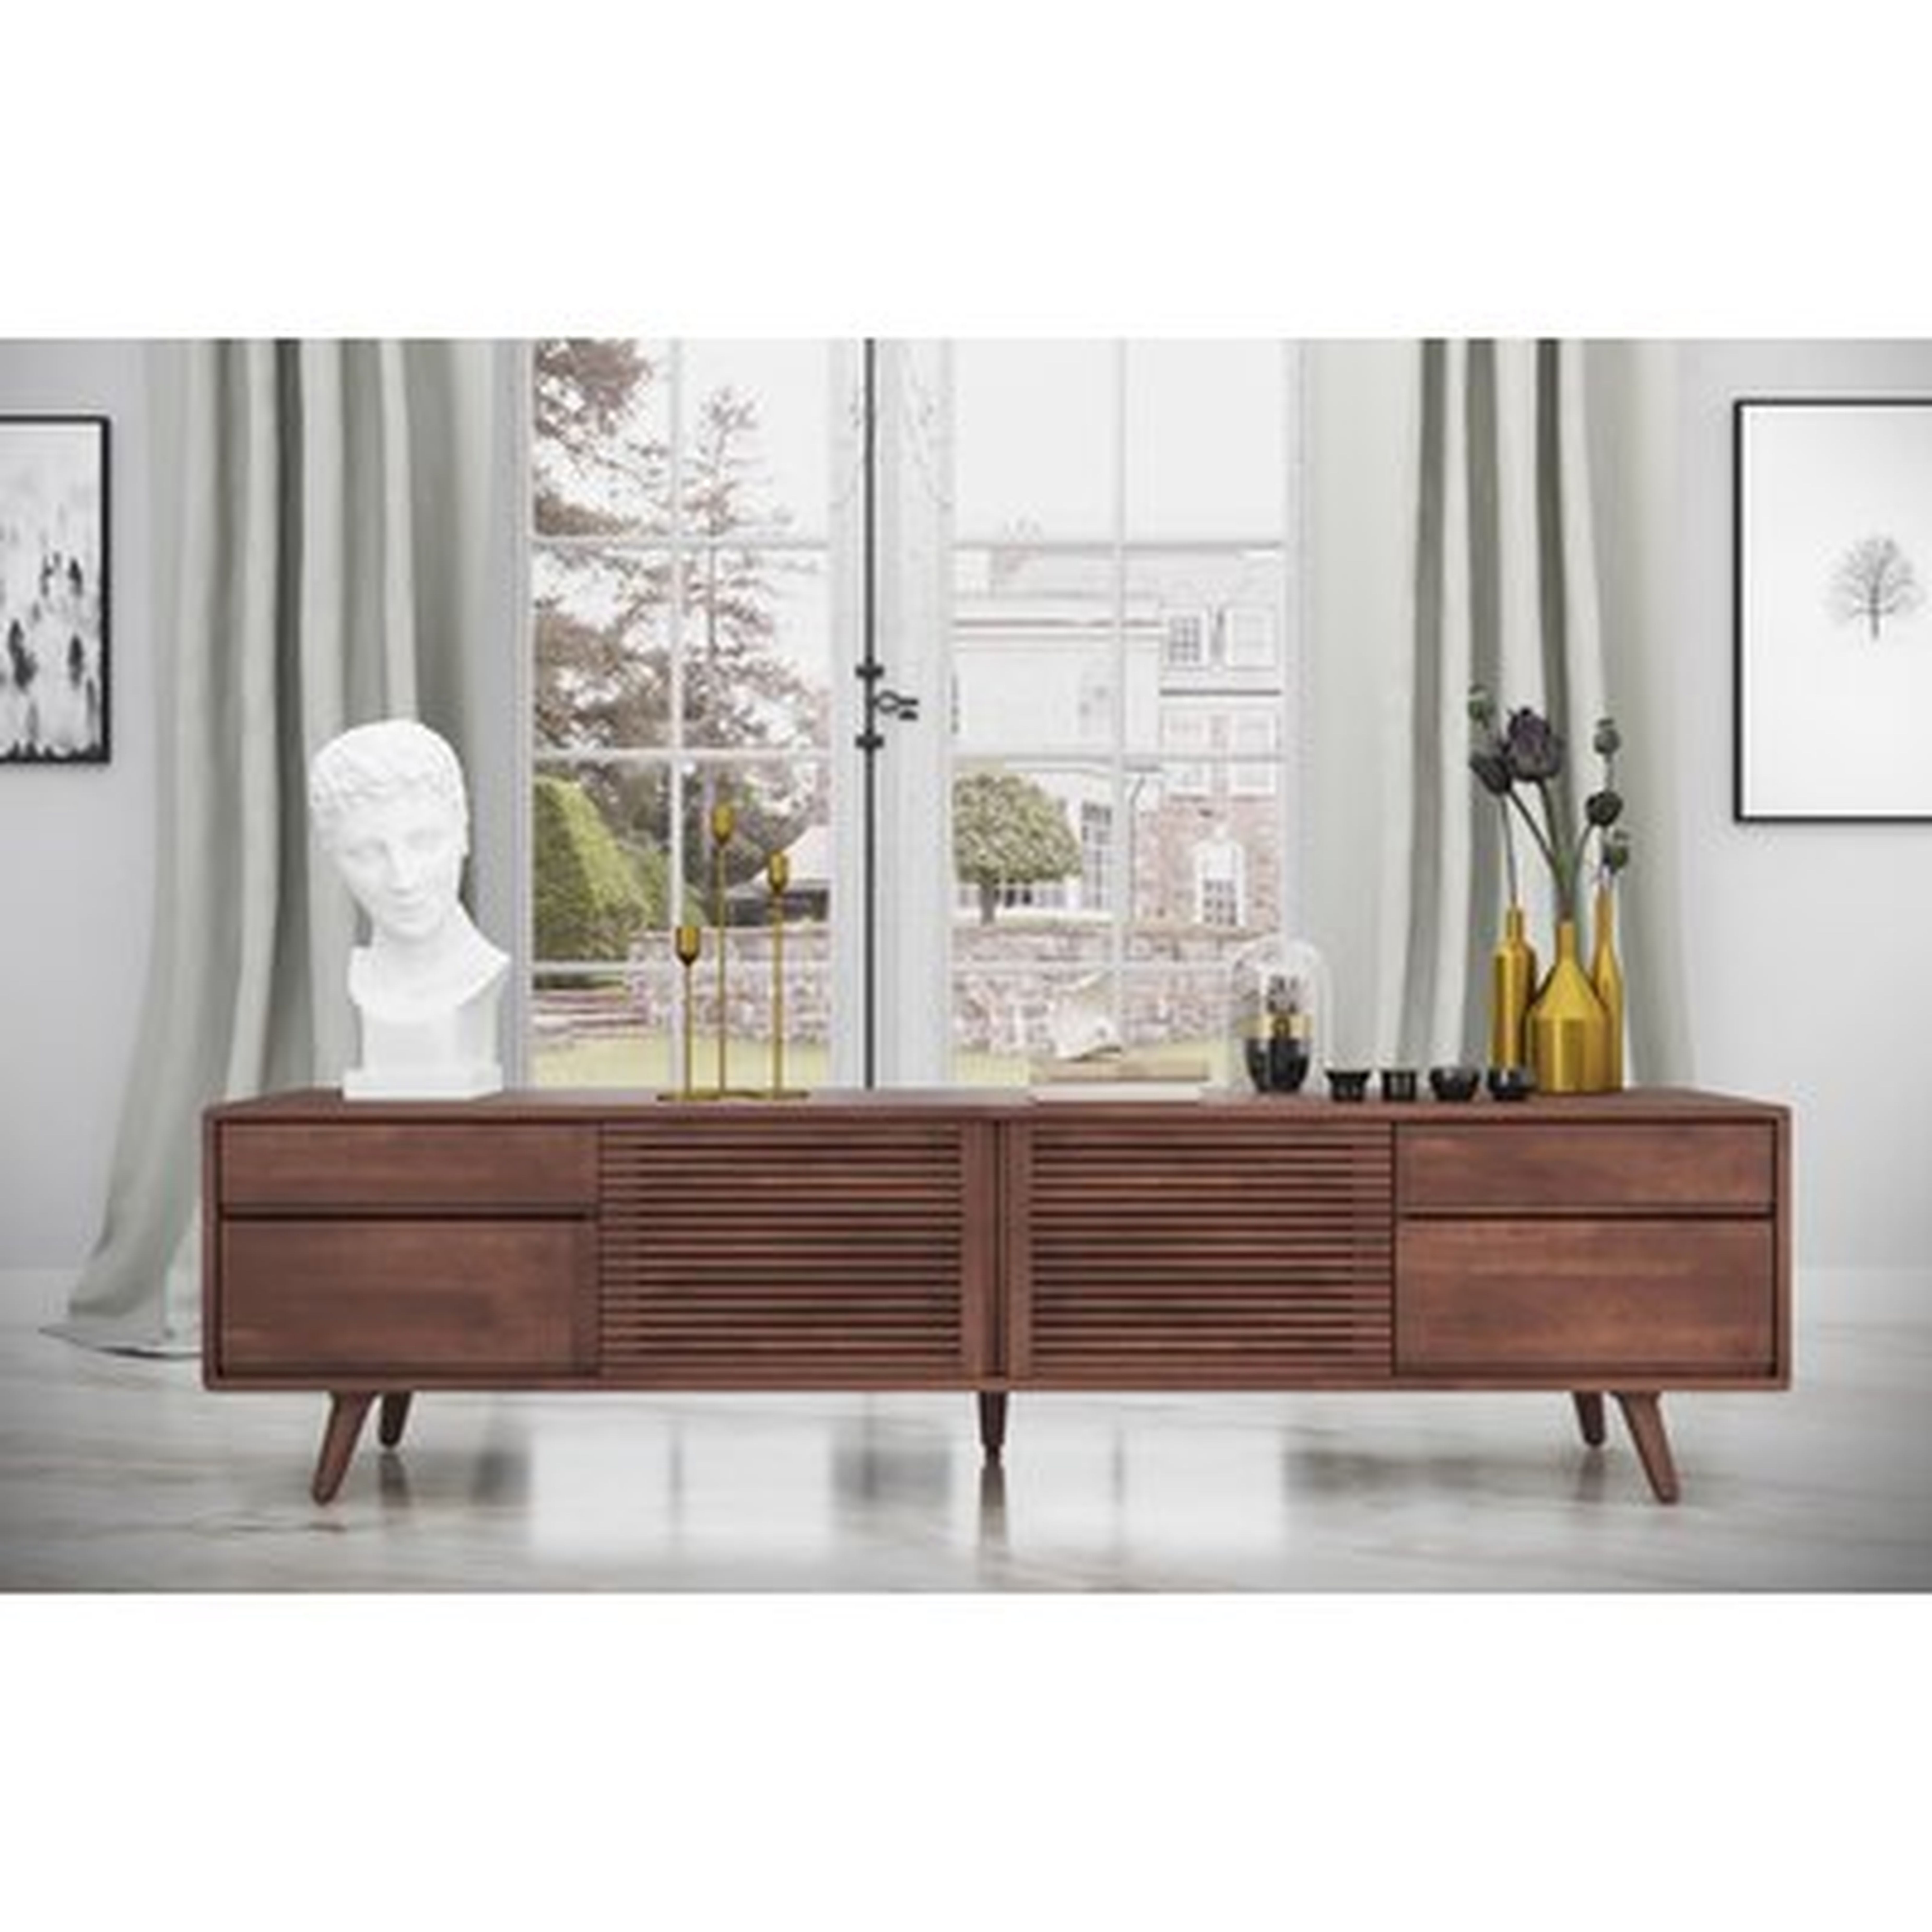 Middlet Cabinet TV Stand for TVs up to 85" inches - Wayfair